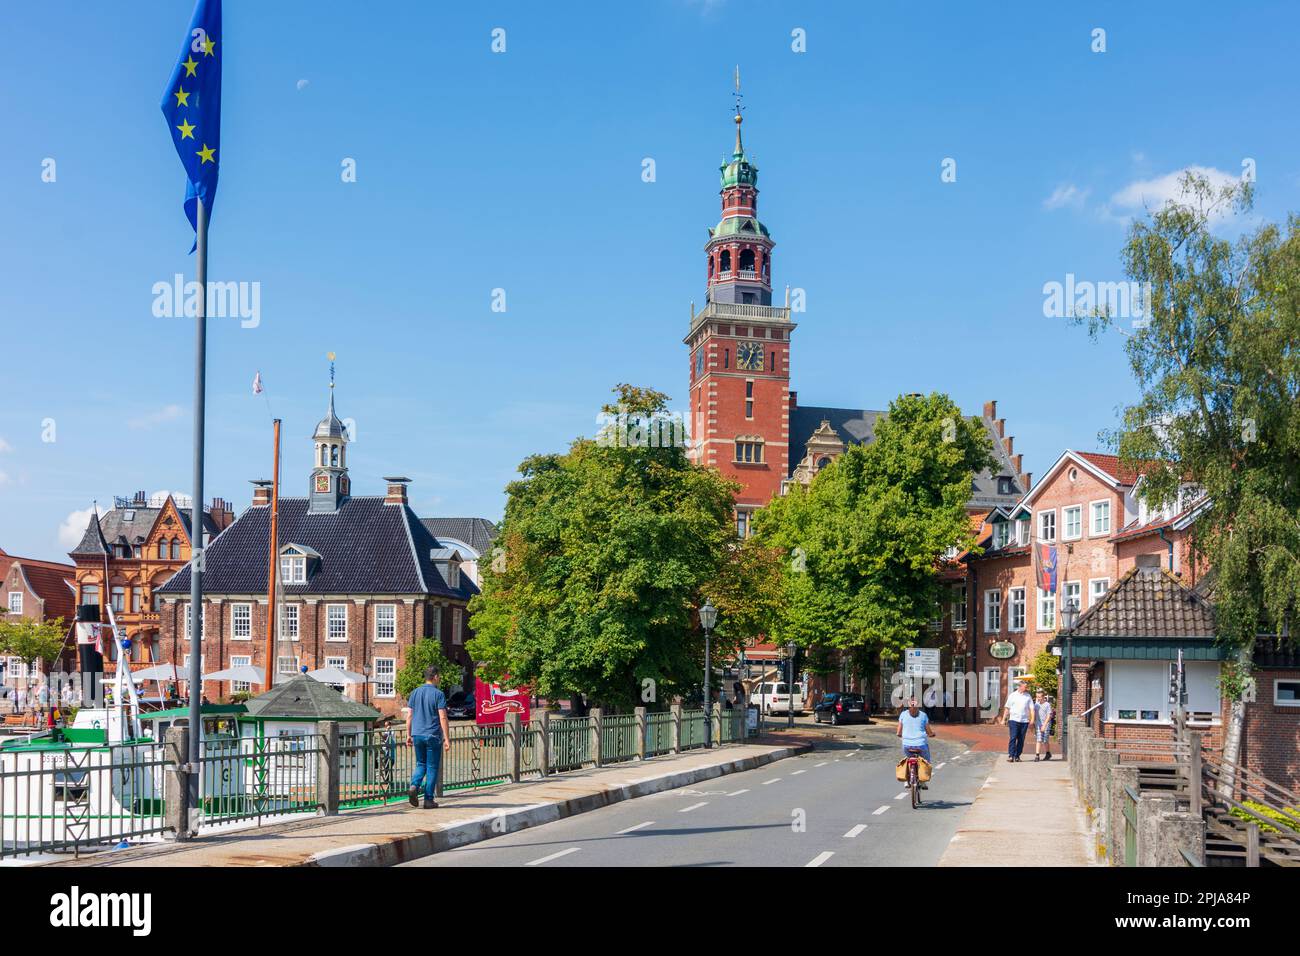 Leer: Alte Waage (Old scale, left) and town hall tower seen from the  Dr.-vom-Bruch-bridge, harbor in Ostfriesland, Niedersachsen, Lower Saxony,  German Stock Photo - Alamy